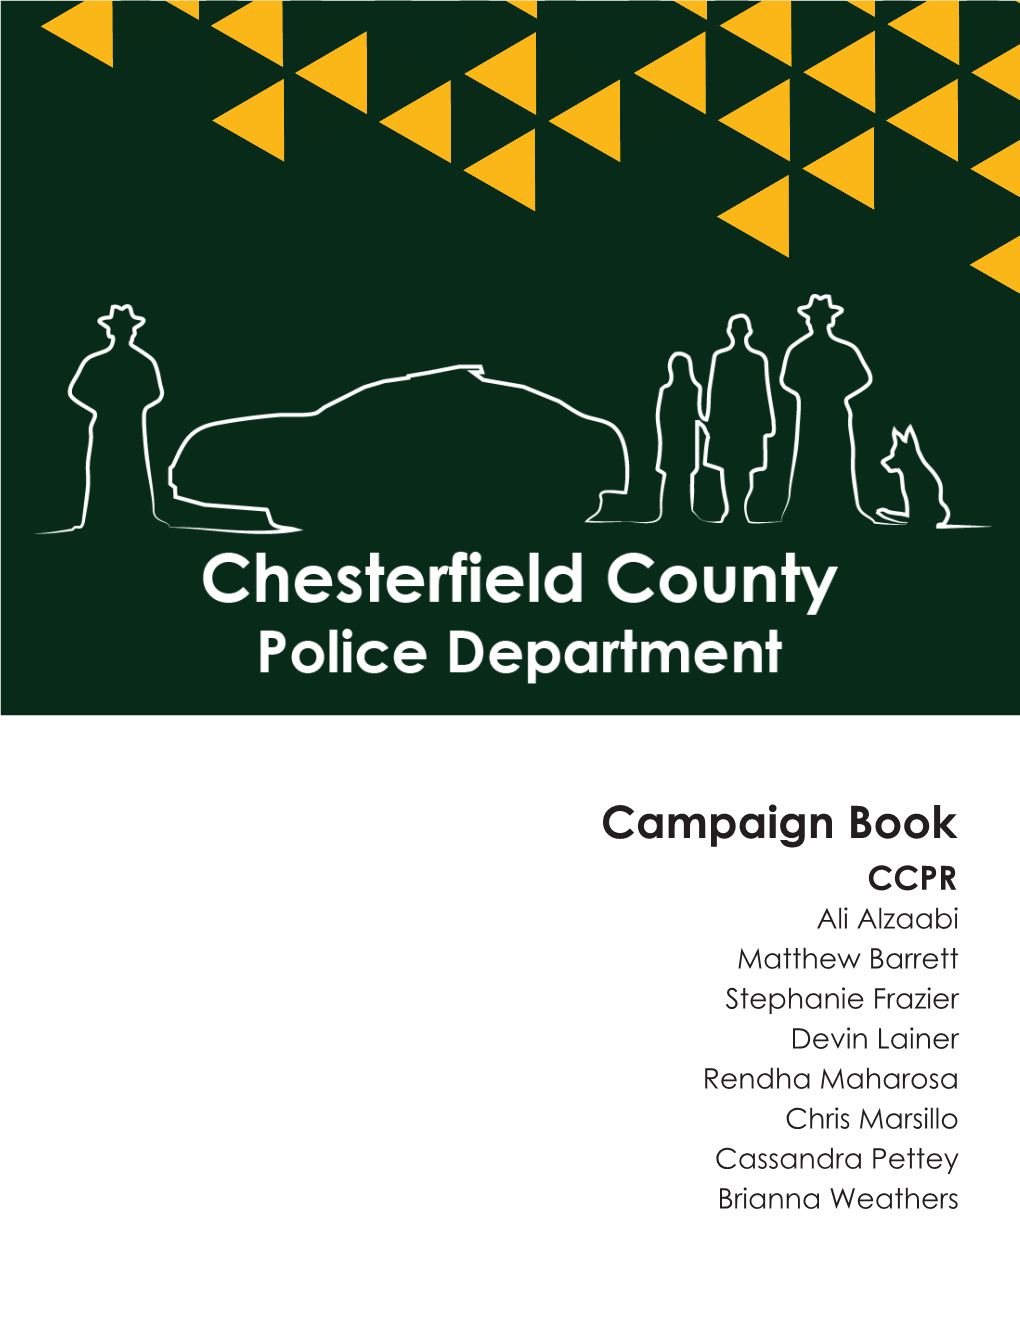 CCPD Recruitment Campaign Can Be Seen